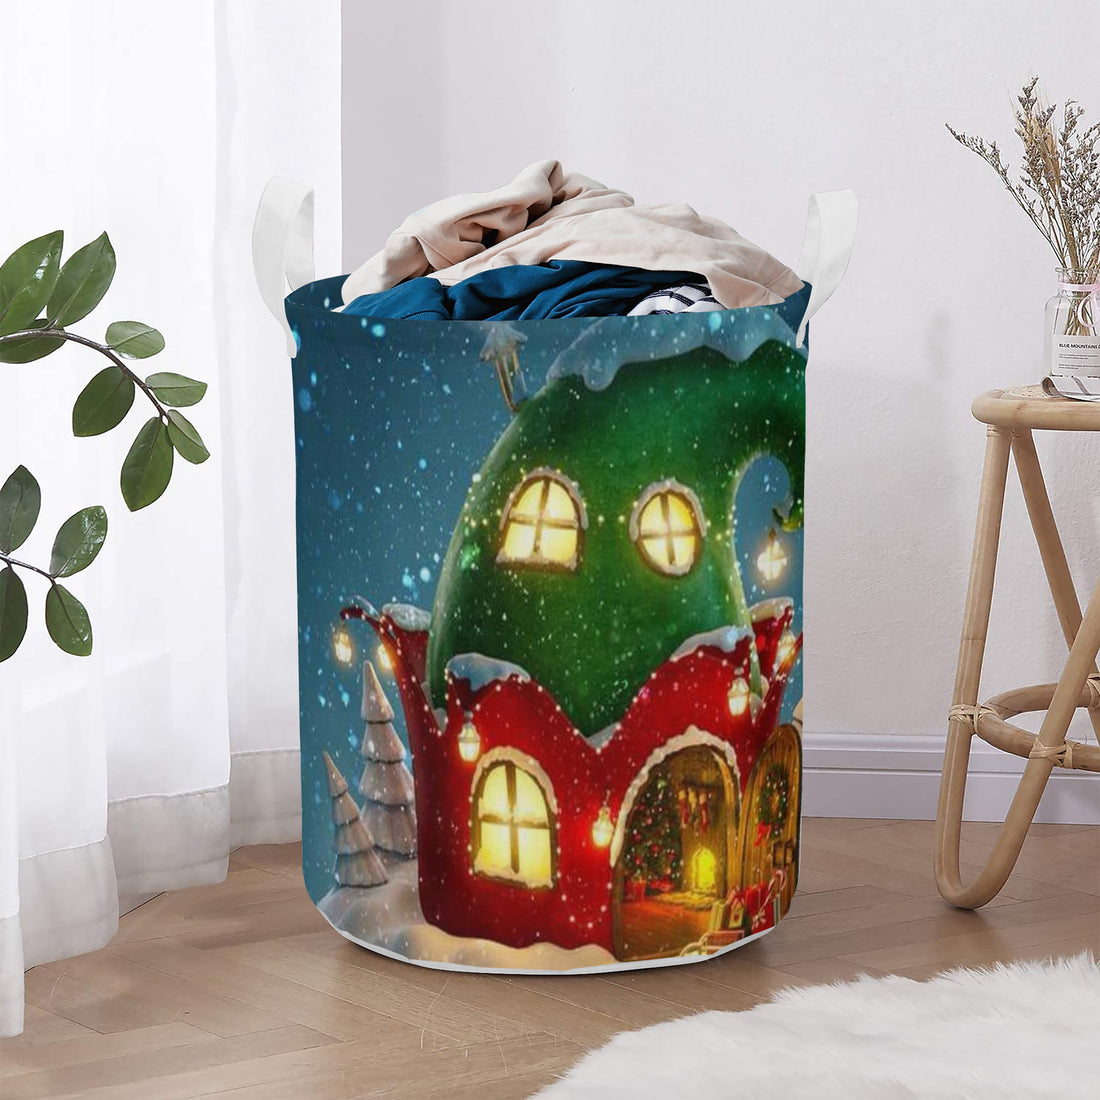 Round Laundry Basket Christmas House Home-clothes-jewelry